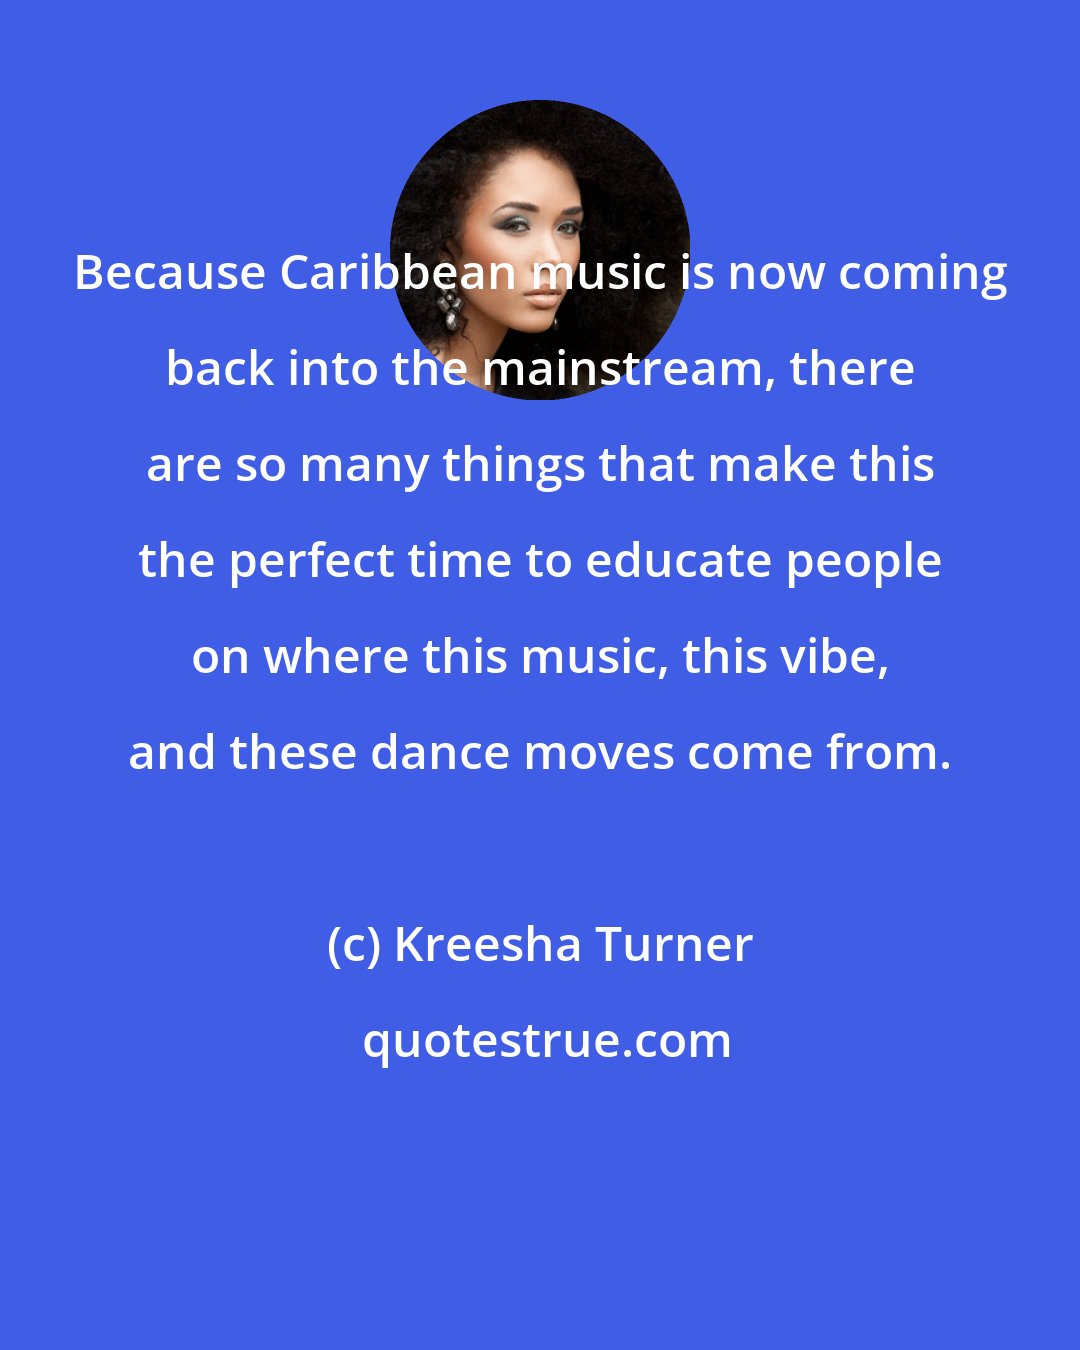 Kreesha Turner: Because Caribbean music is now coming back into the mainstream, there are so many things that make this the perfect time to educate people on where this music, this vibe, and these dance moves come from.